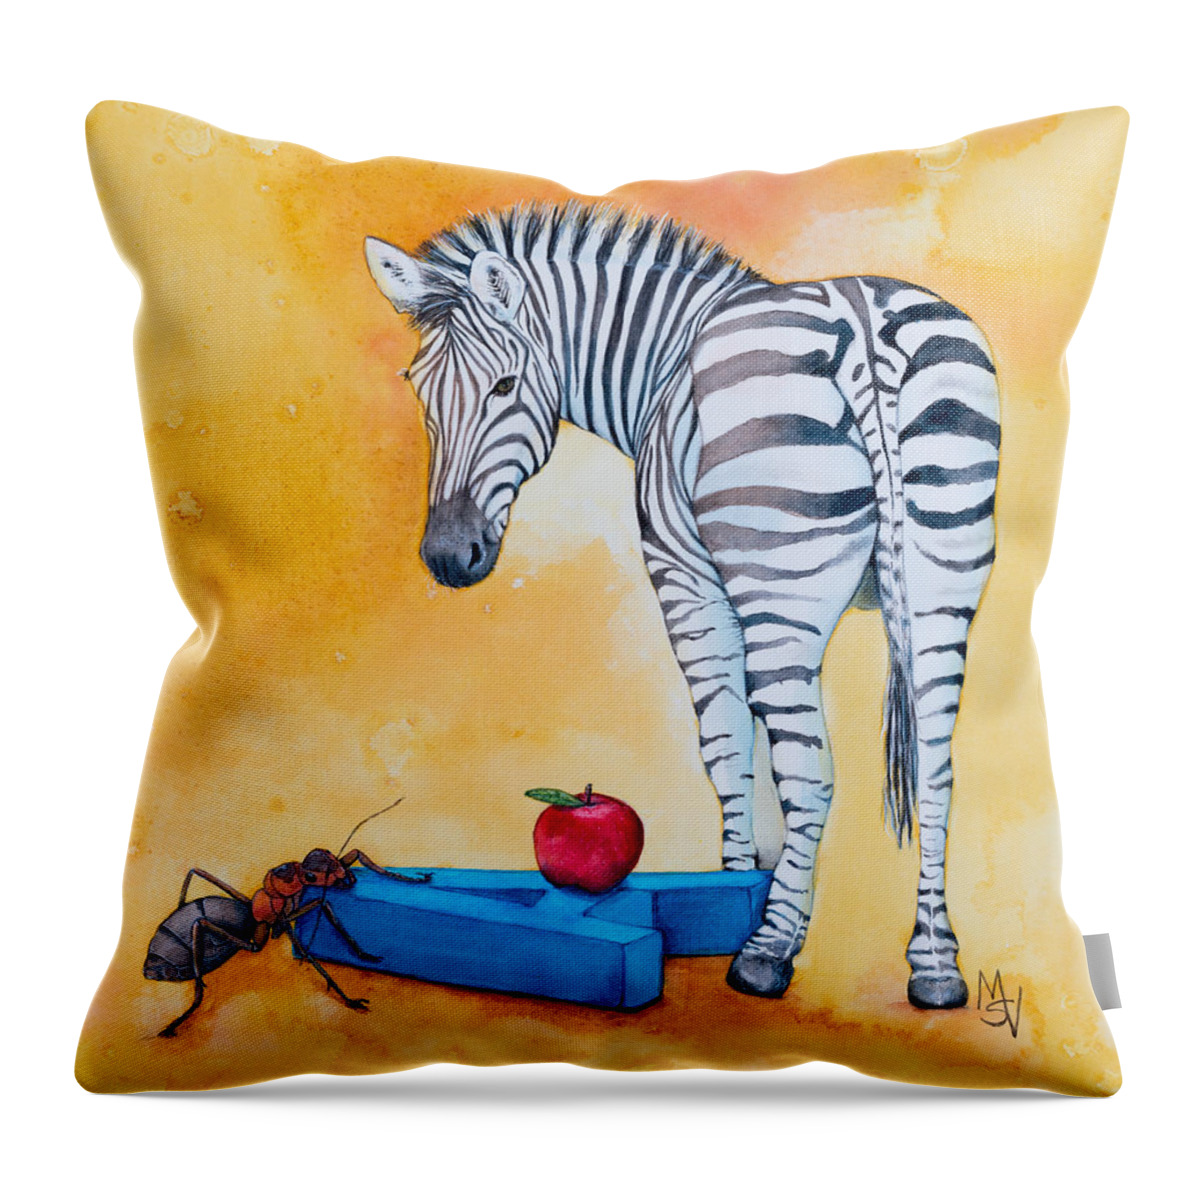 Zebra Throw Pillow featuring the painting The End by Marie Stone-van Vuuren